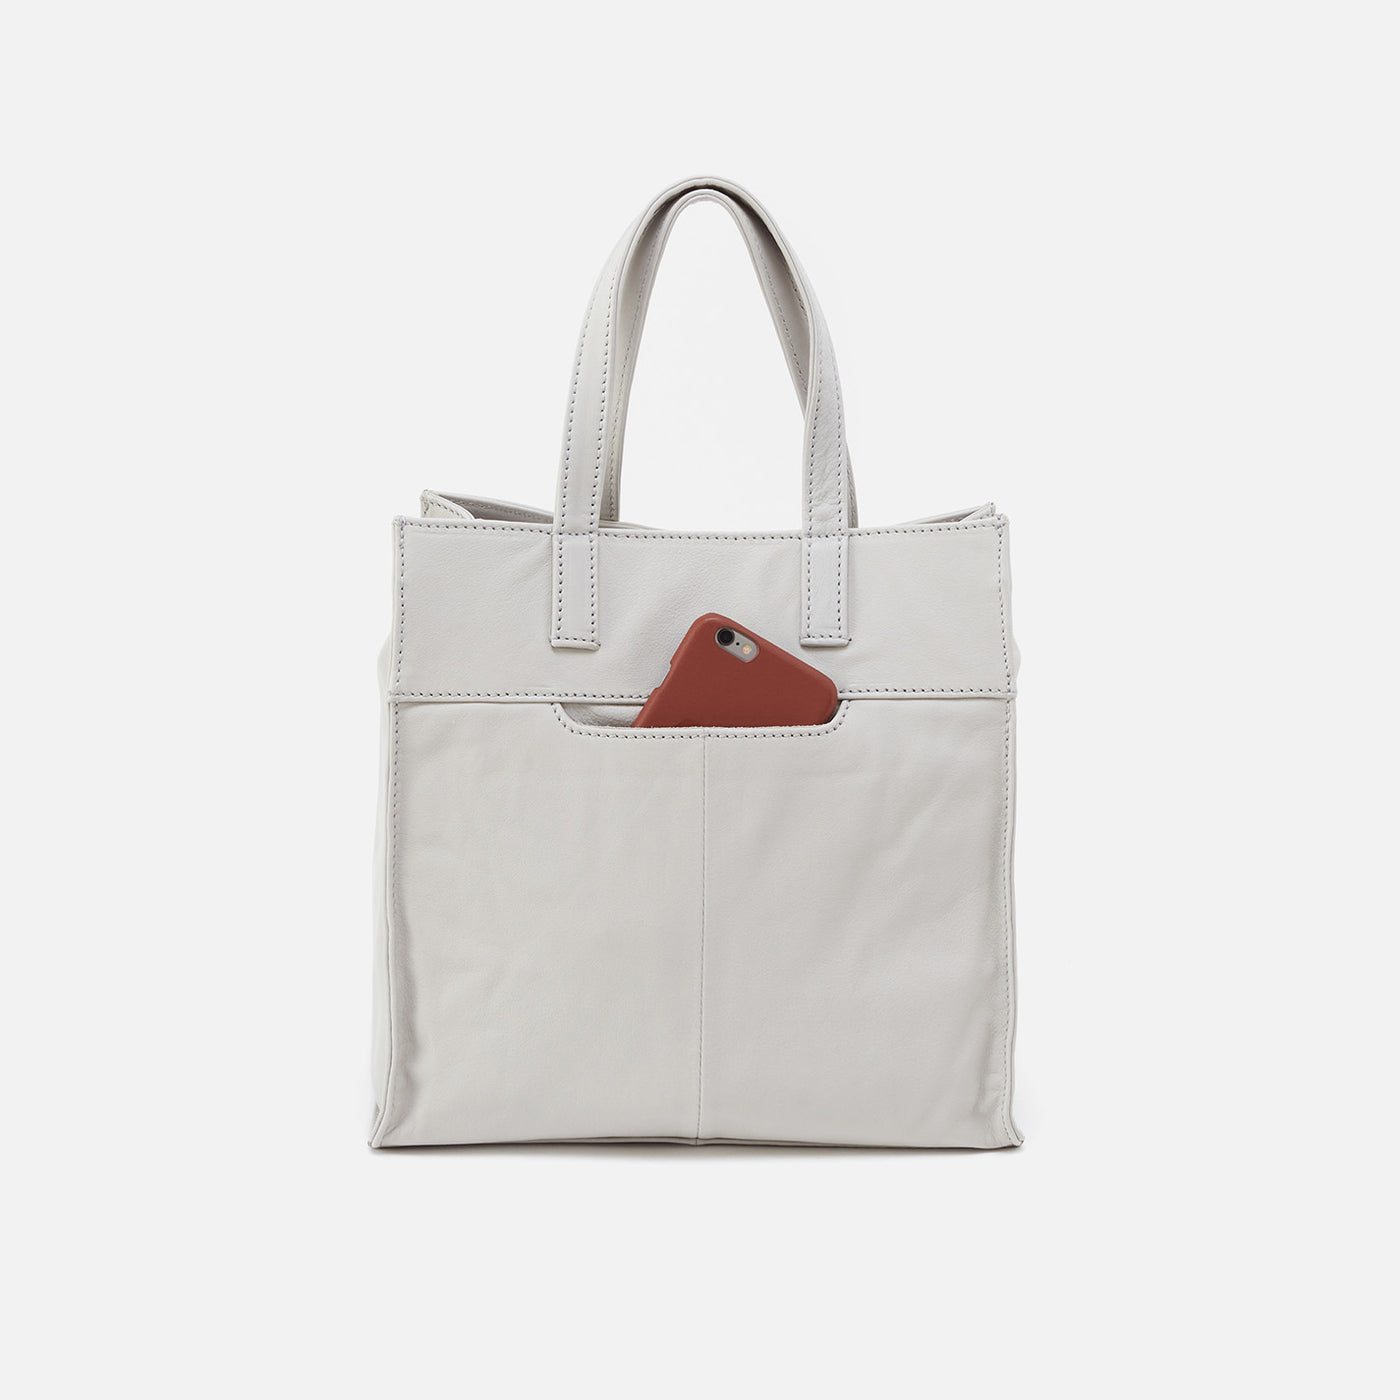 Shaker Utility Tote in Soft Leather - Light Grey